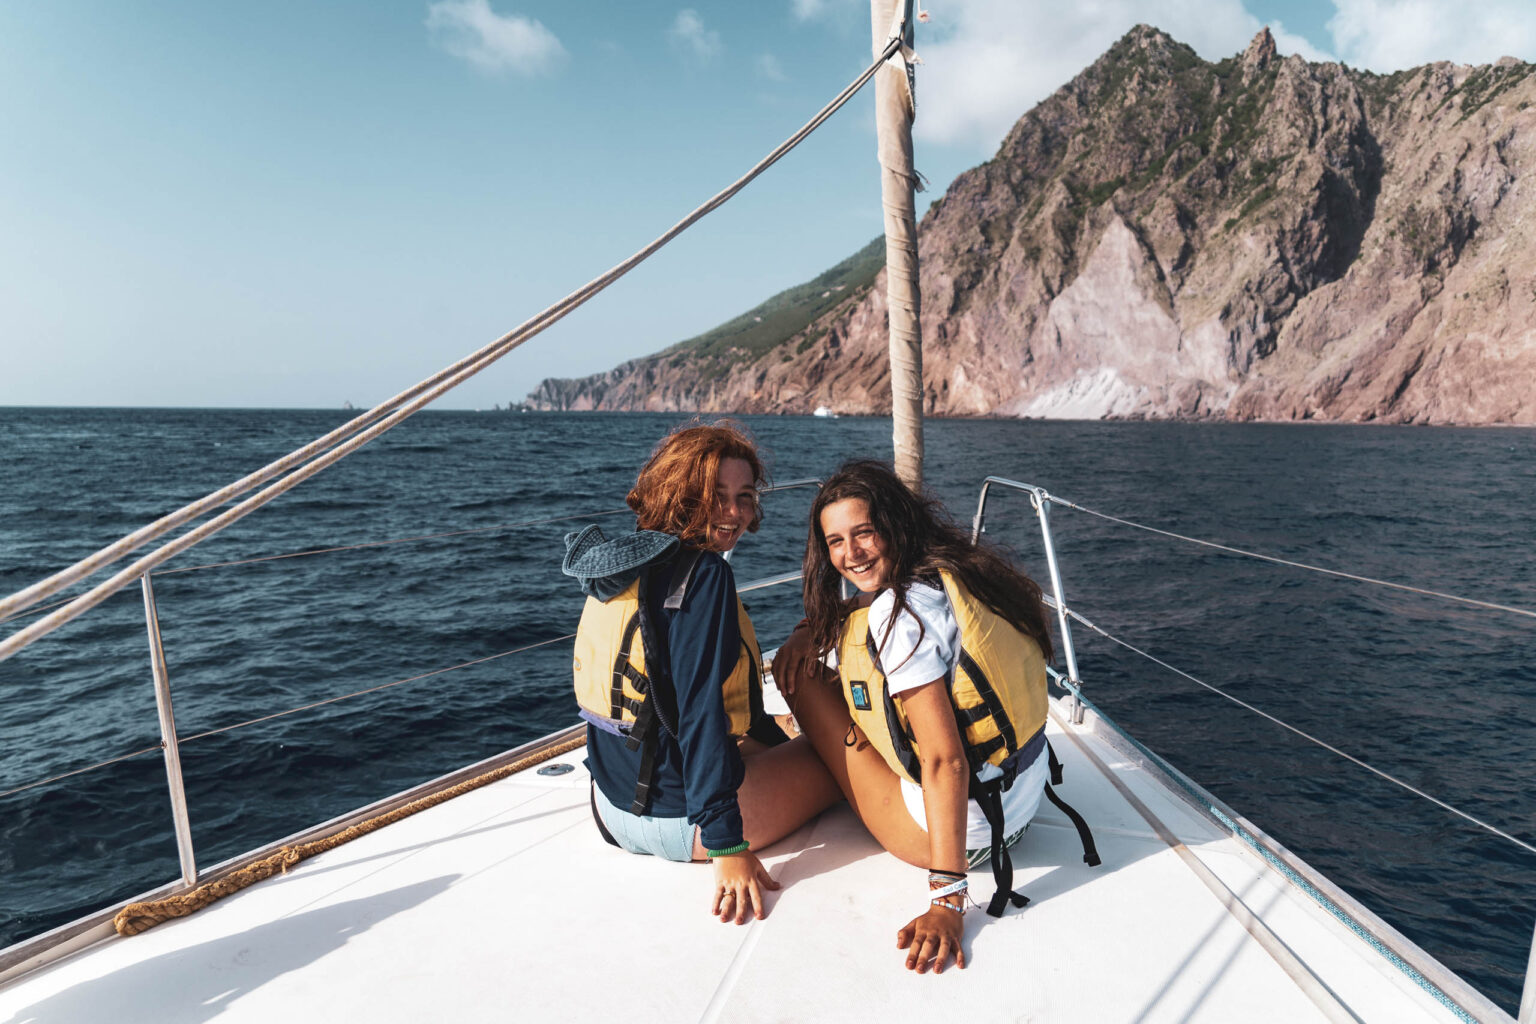 Two women sitting on the back of a sailboat in the ocean.